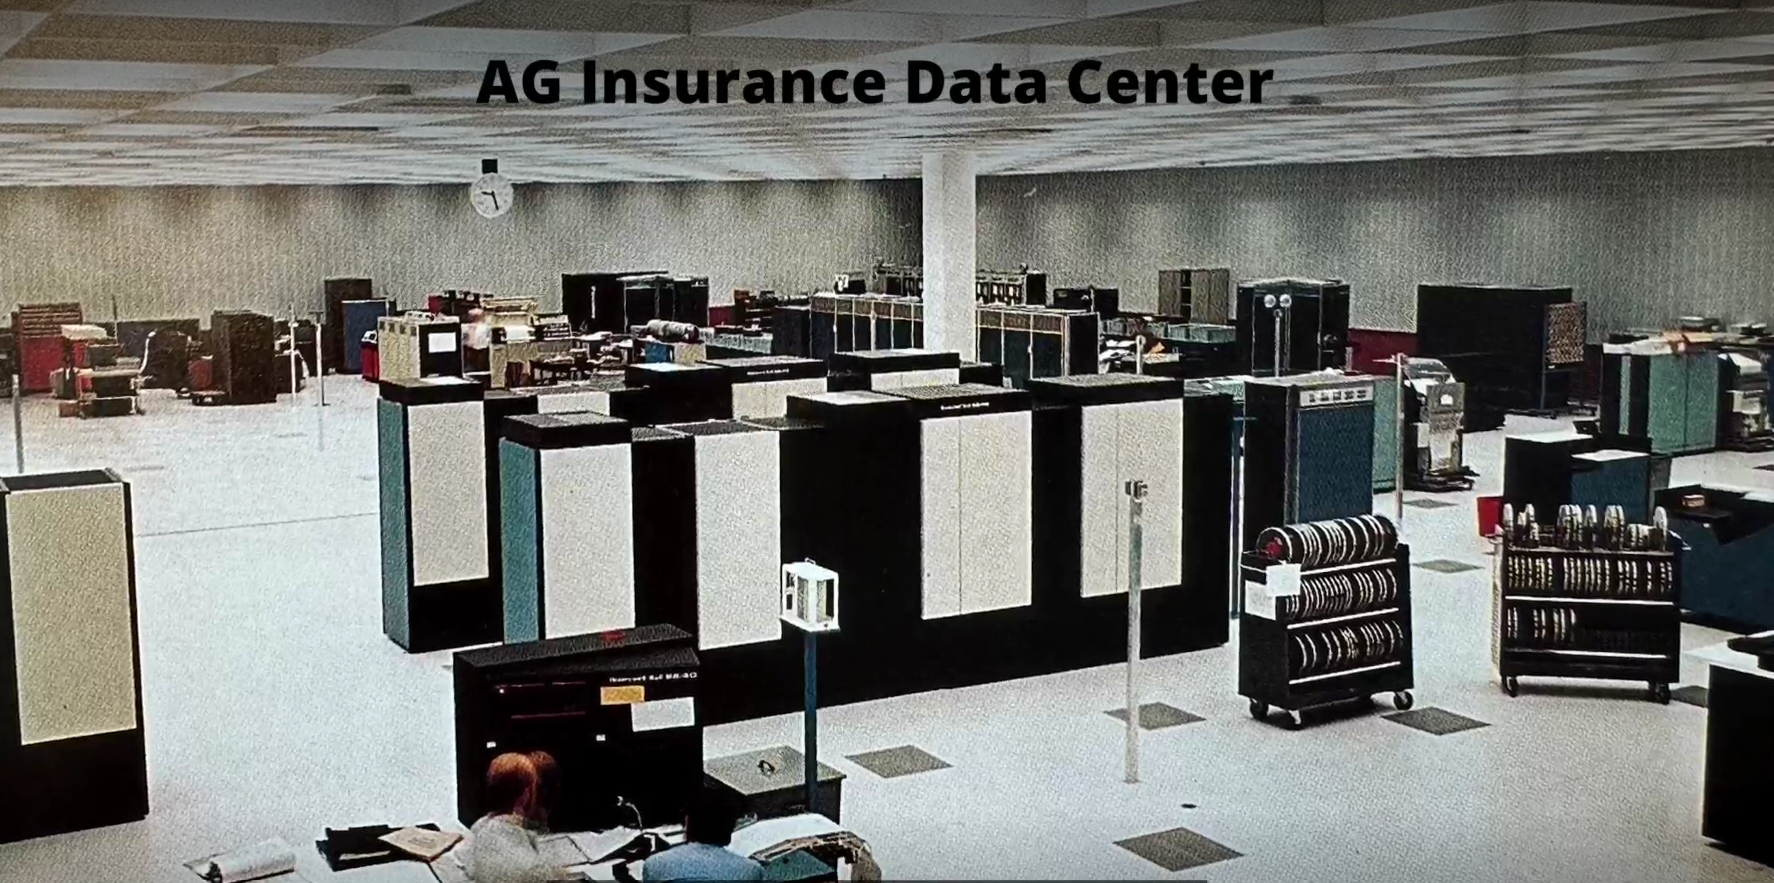 An image of AG Insurance's datacenter in the 1970s